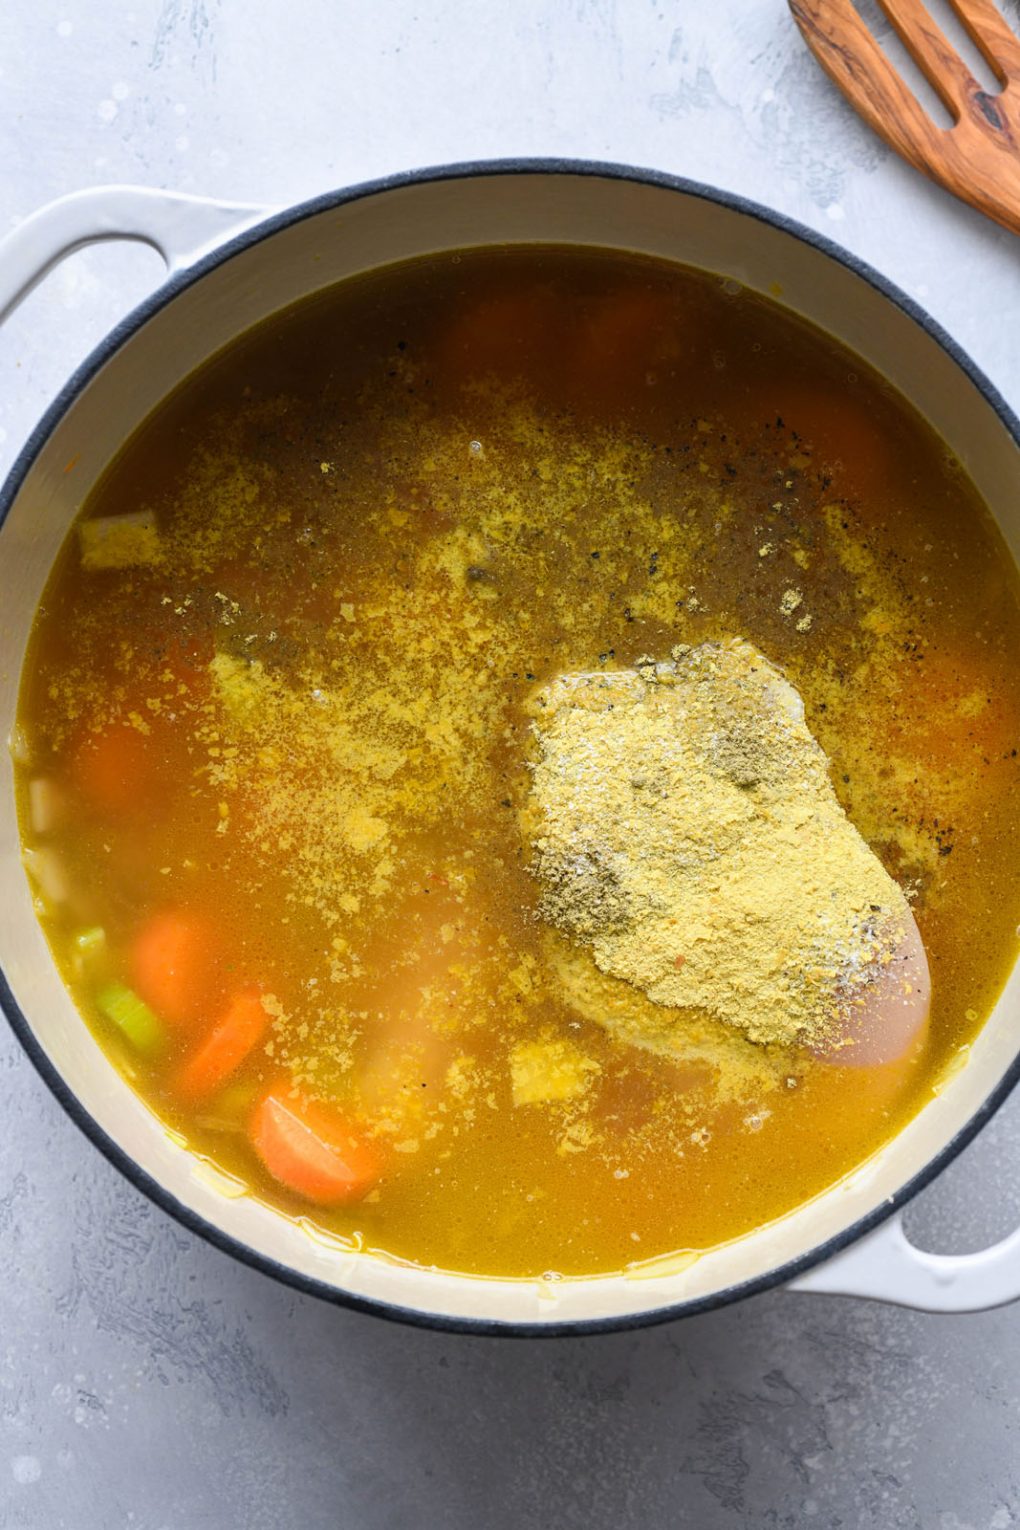 Overhead shot of a large white ceramic soup pot filled with broth, chicken breast, and spices.